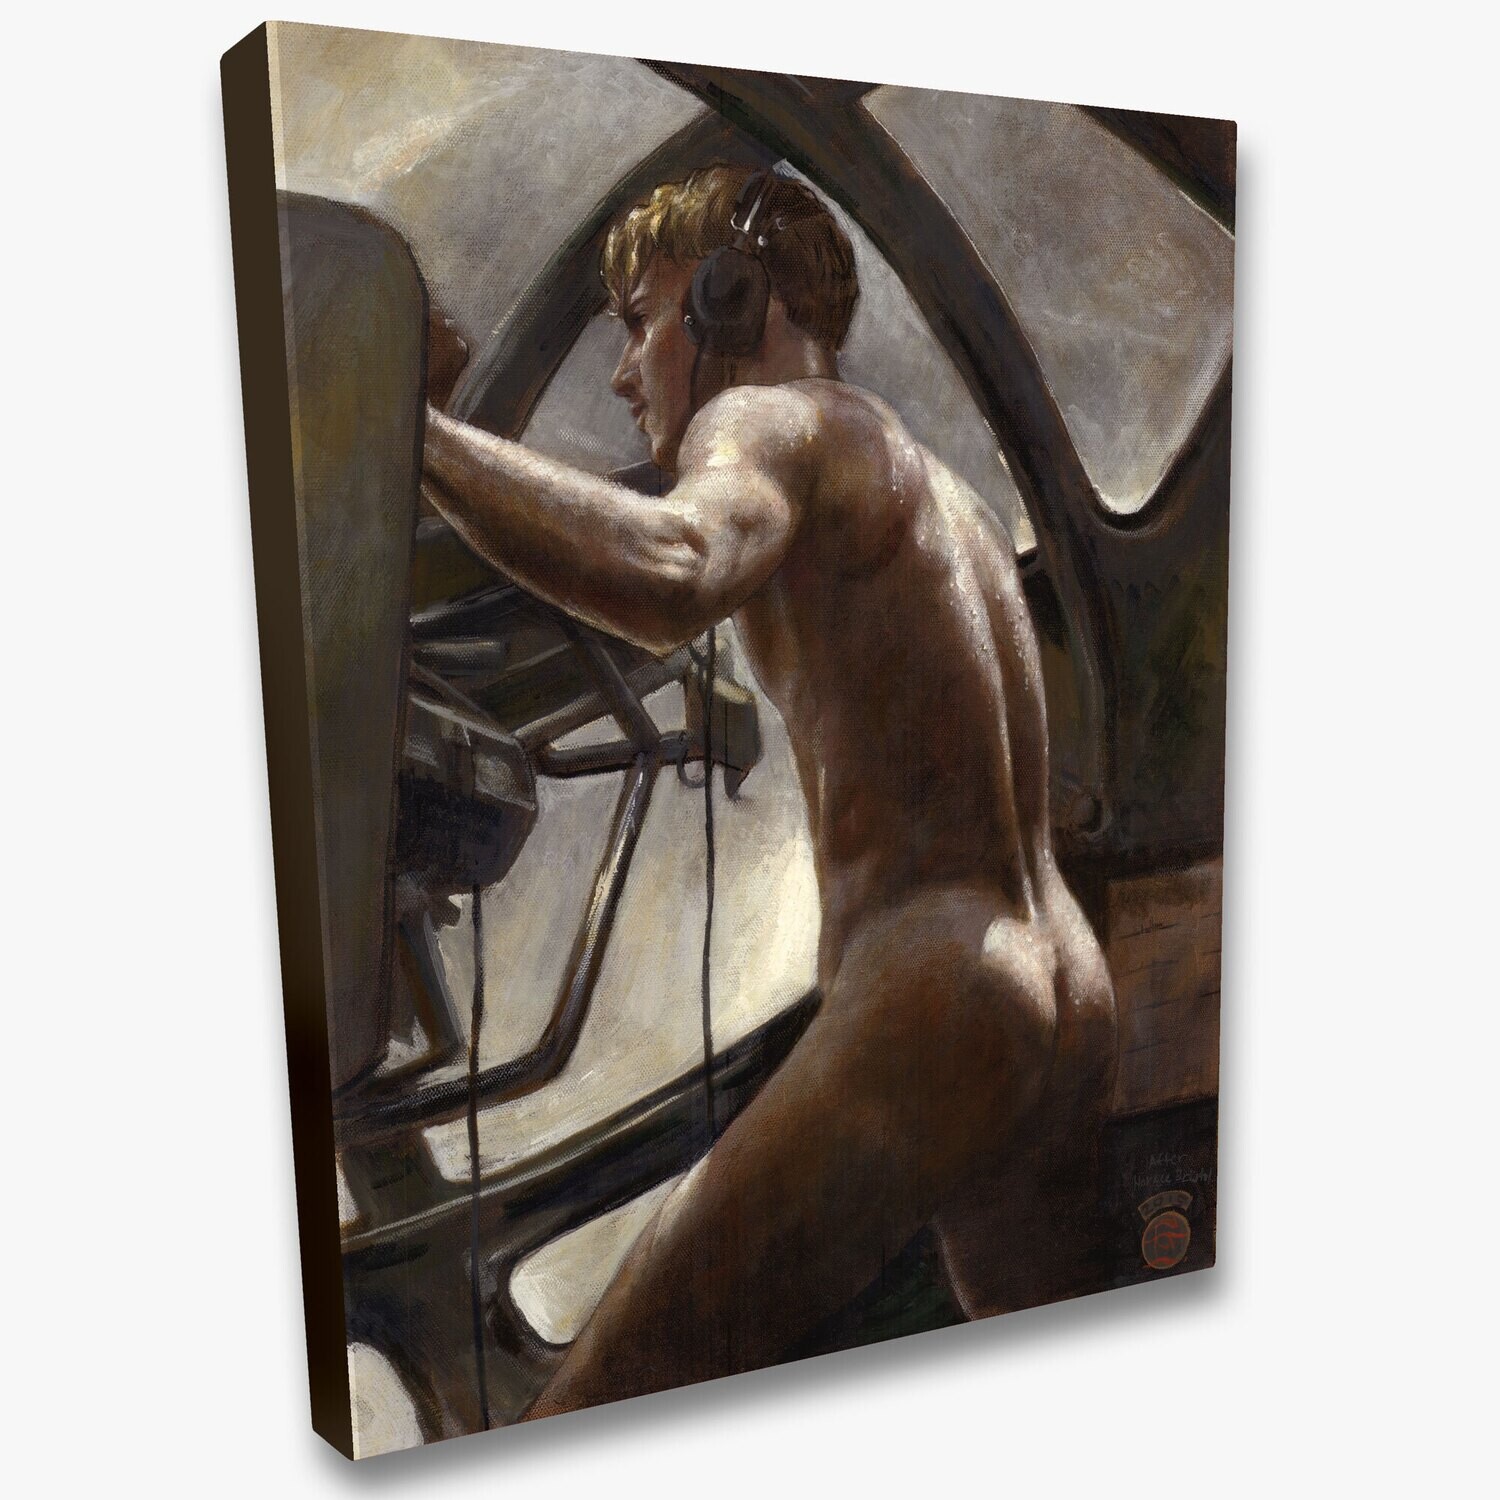 "The Naked Gunner" Limited Edition Giclée on Canvas 20" X 16"